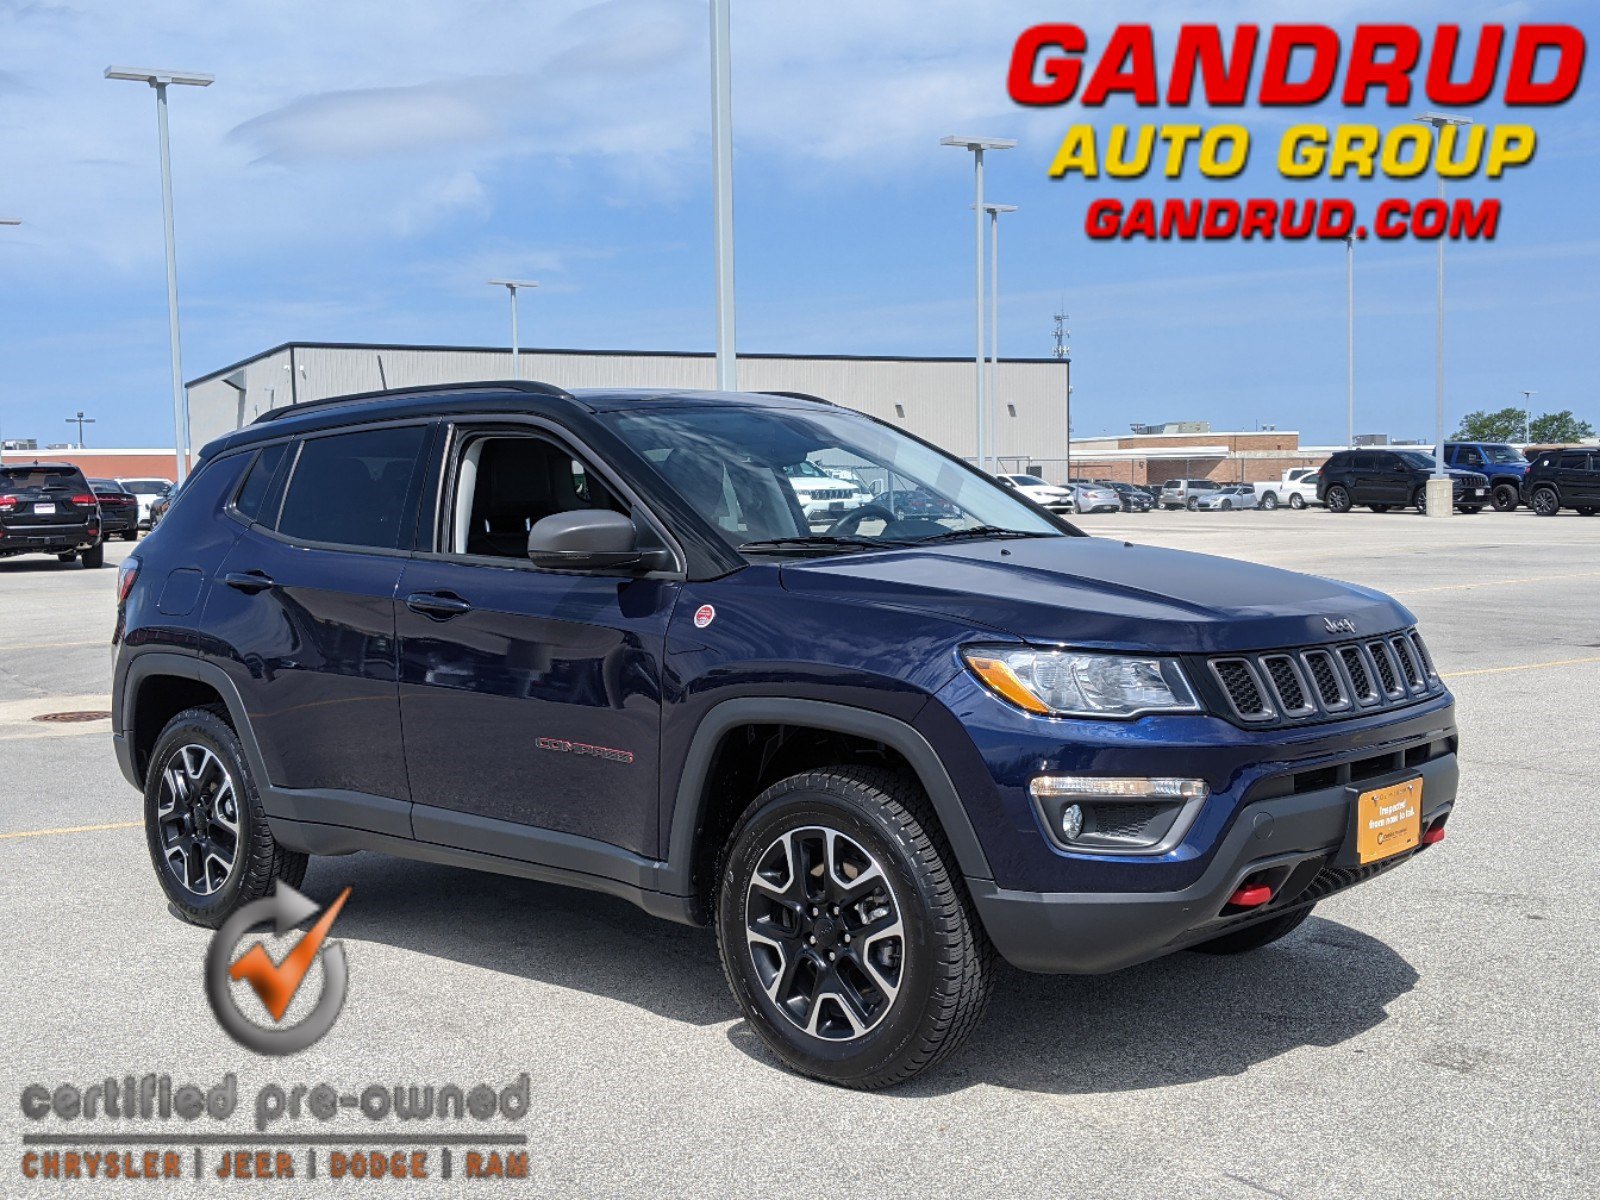 Used Jeep Compass For Sale Test Drive At Home Kelley Blue Book